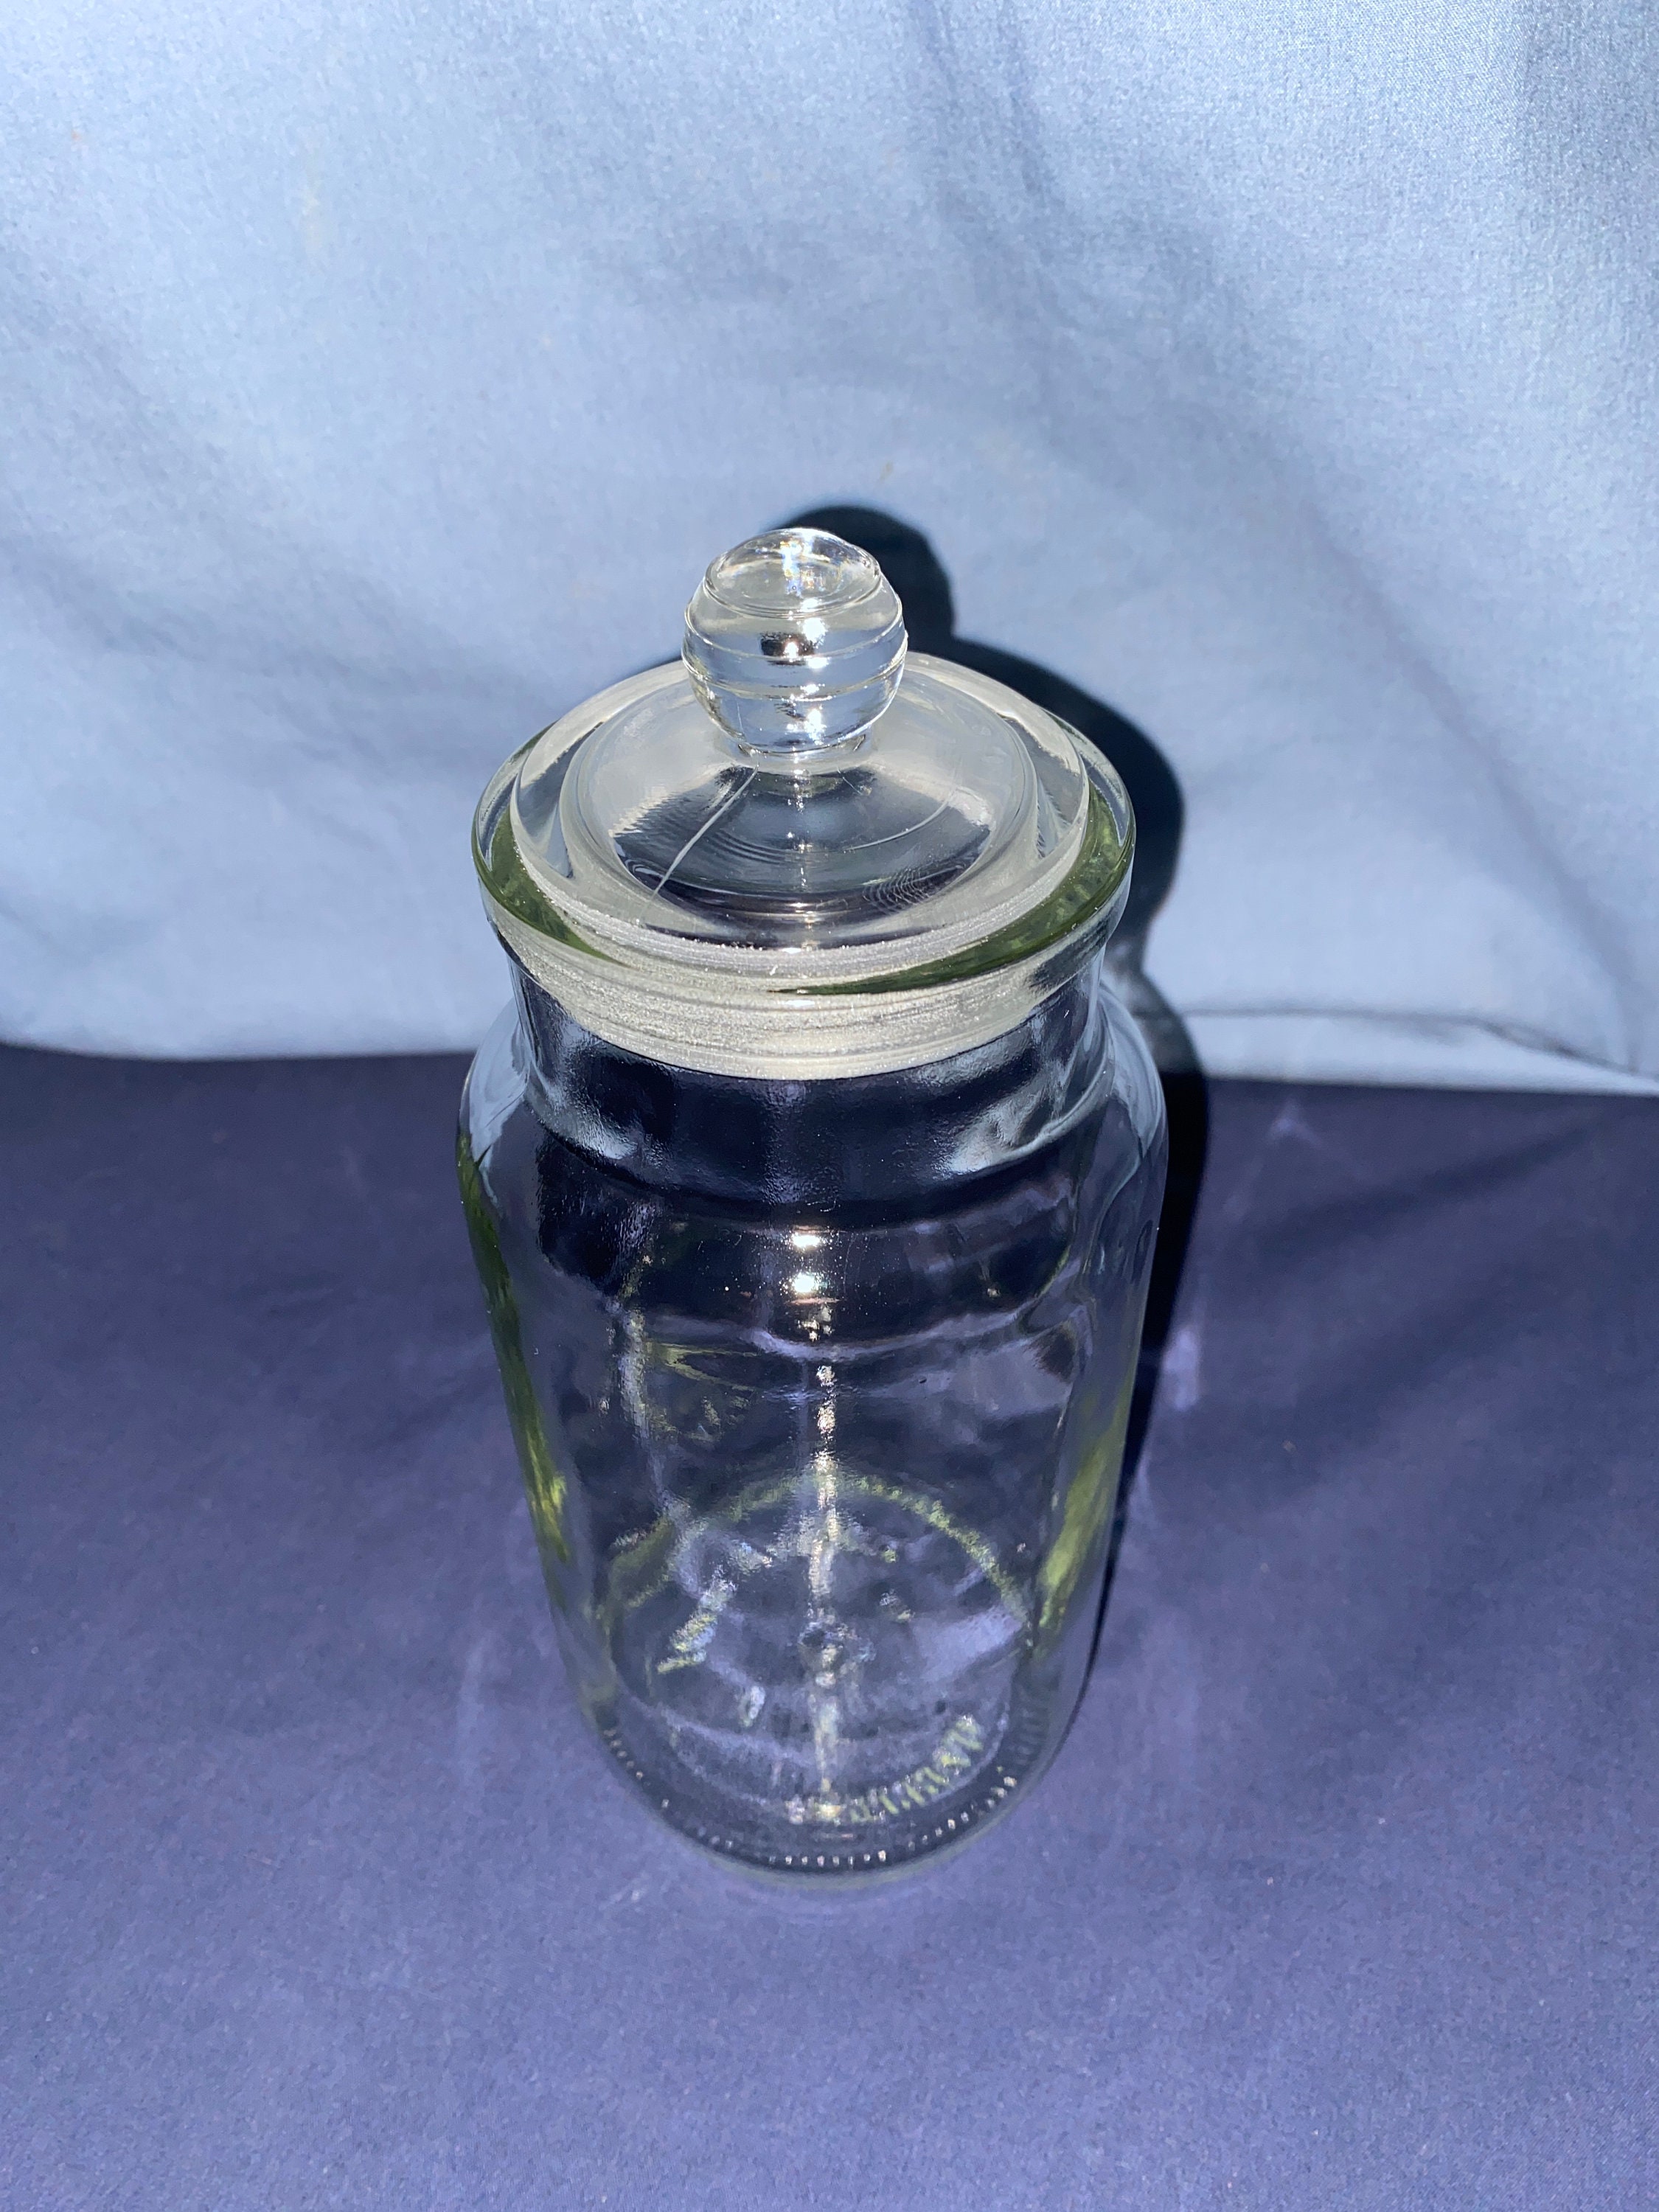 Carraway Etched Glass Canister with Lid  Glass canisters, Glass canister  jars, Glass containers